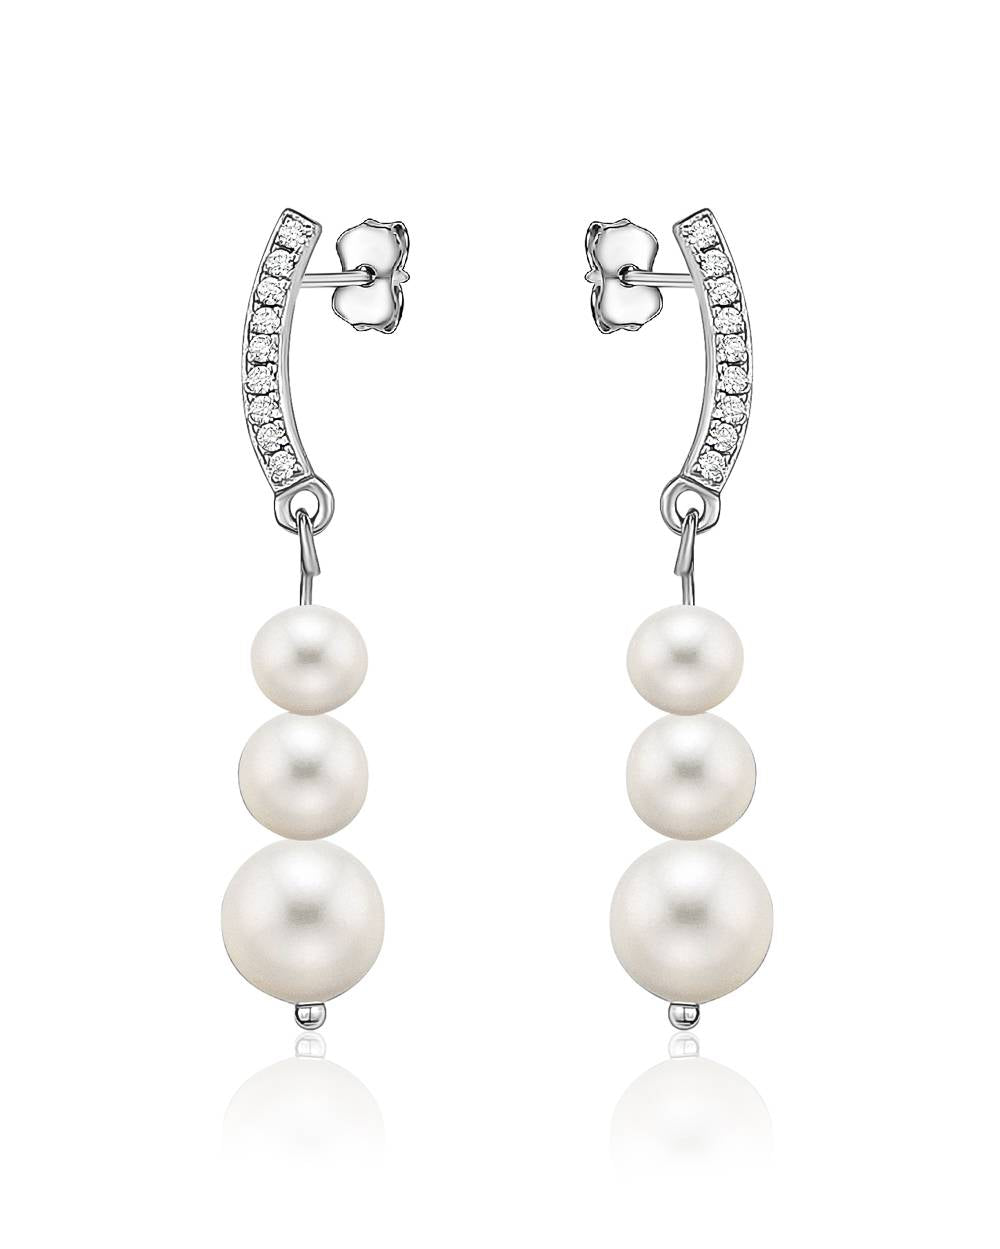 Dangling Freshwater pearls with cubic zirconia